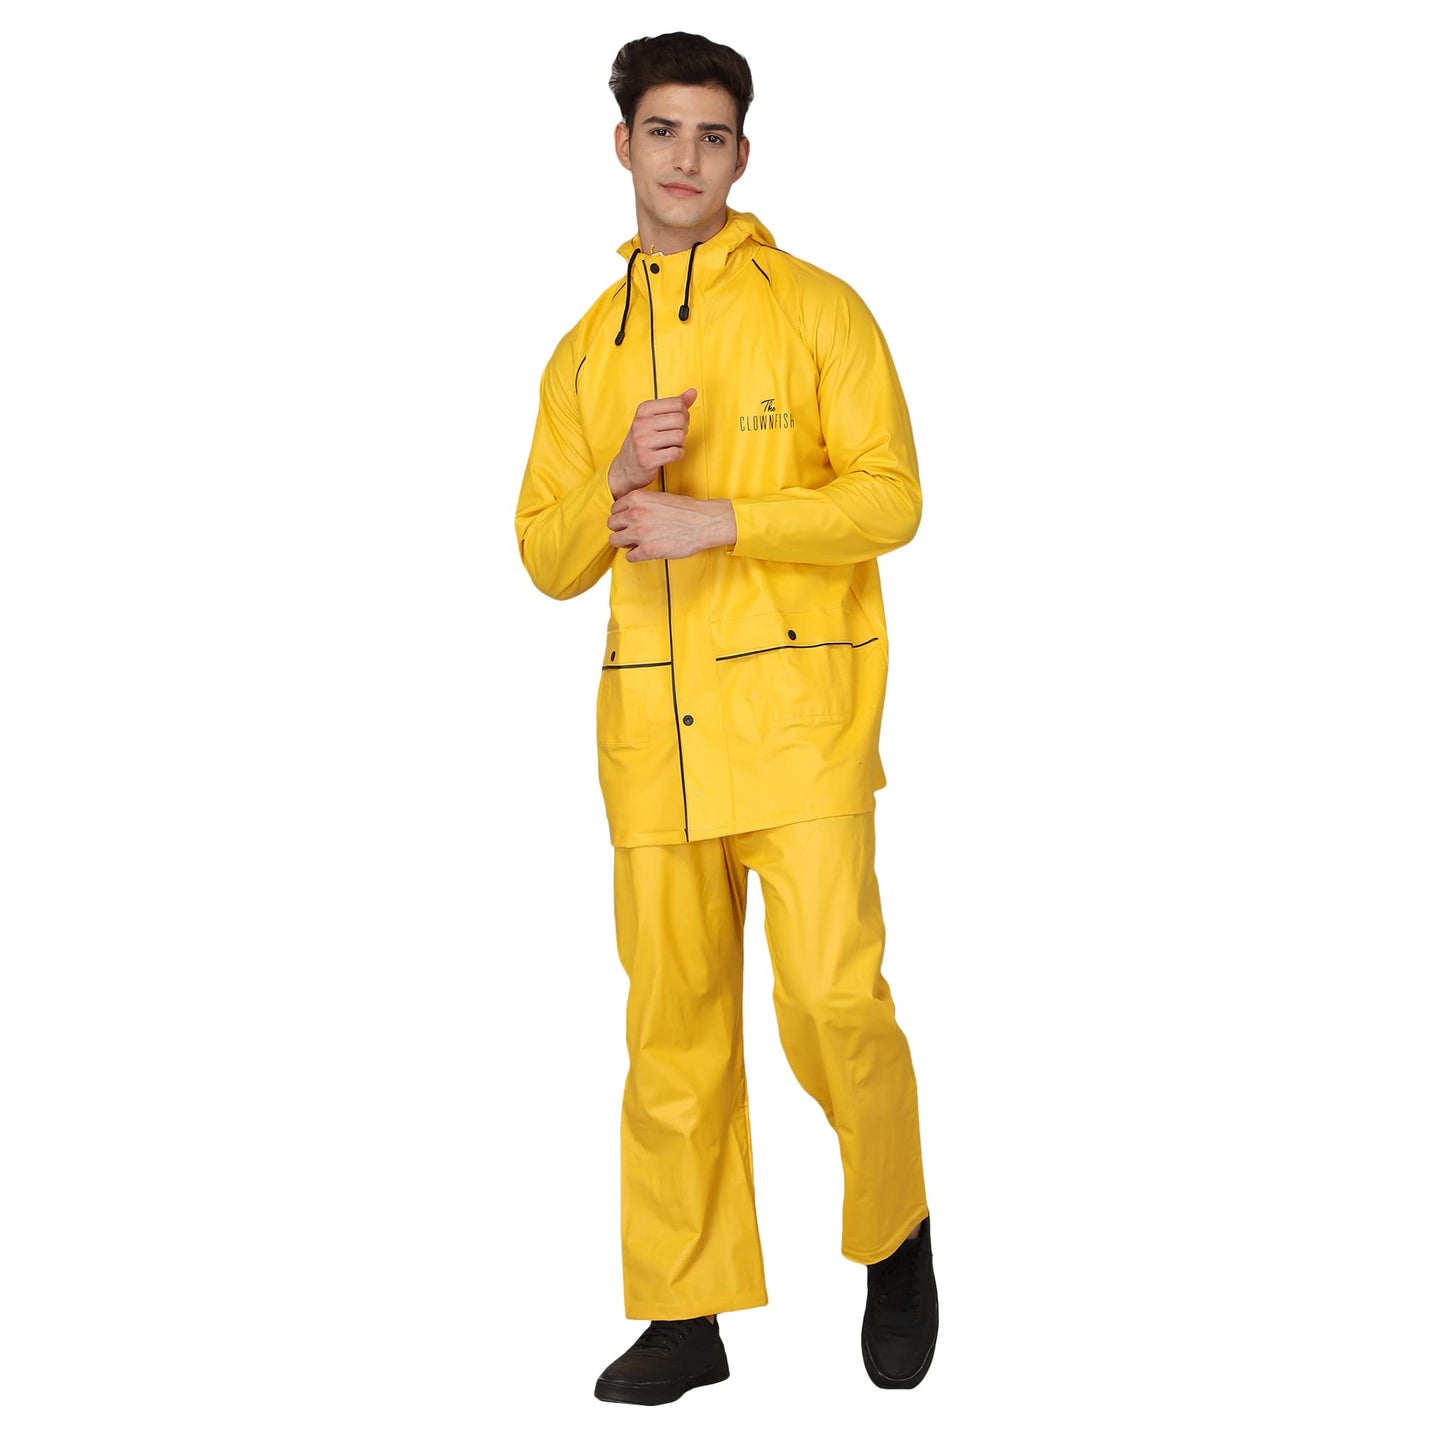 THE CLOWNFISH Oceanic Men's Waterproof PVC Raincoat with Hood and Reflector Logo at Back for Night Travelling. Set of Top and Bottom (Blue, XL)